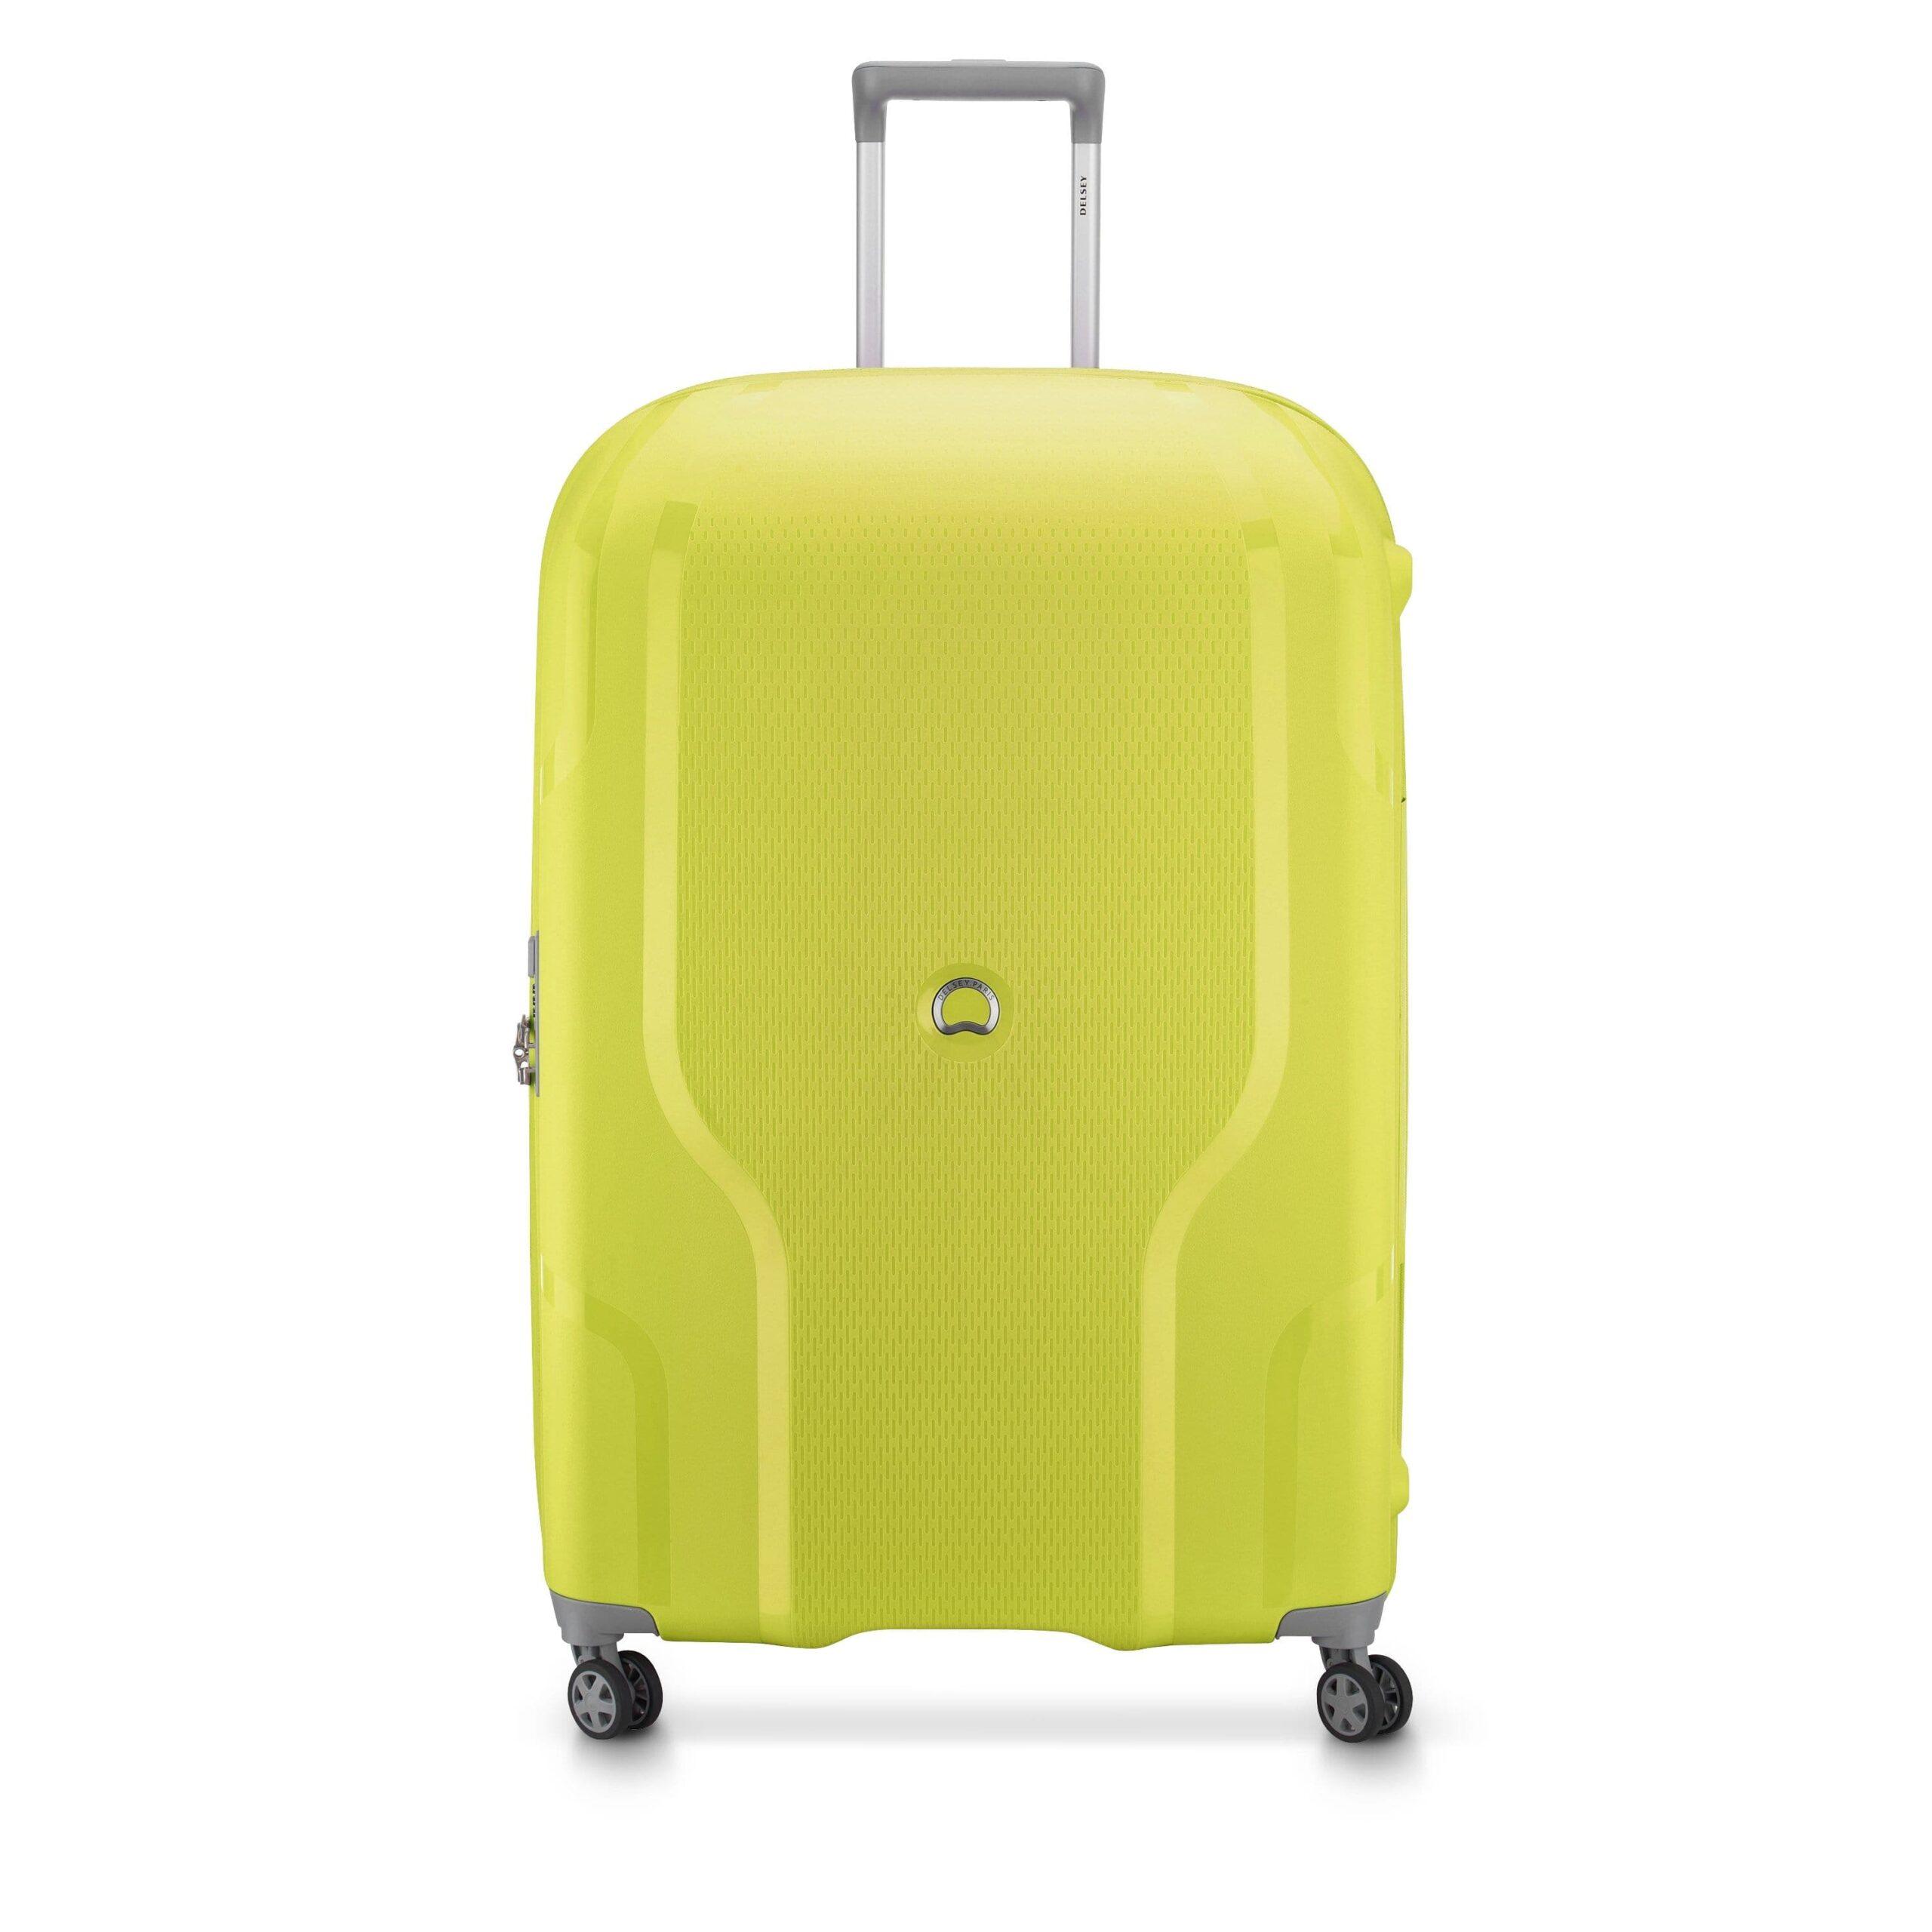 Delsey Clavel 83cm Hardcase 4 Double Wheel Check-In Luggage Trolley Lemon - 00384583015